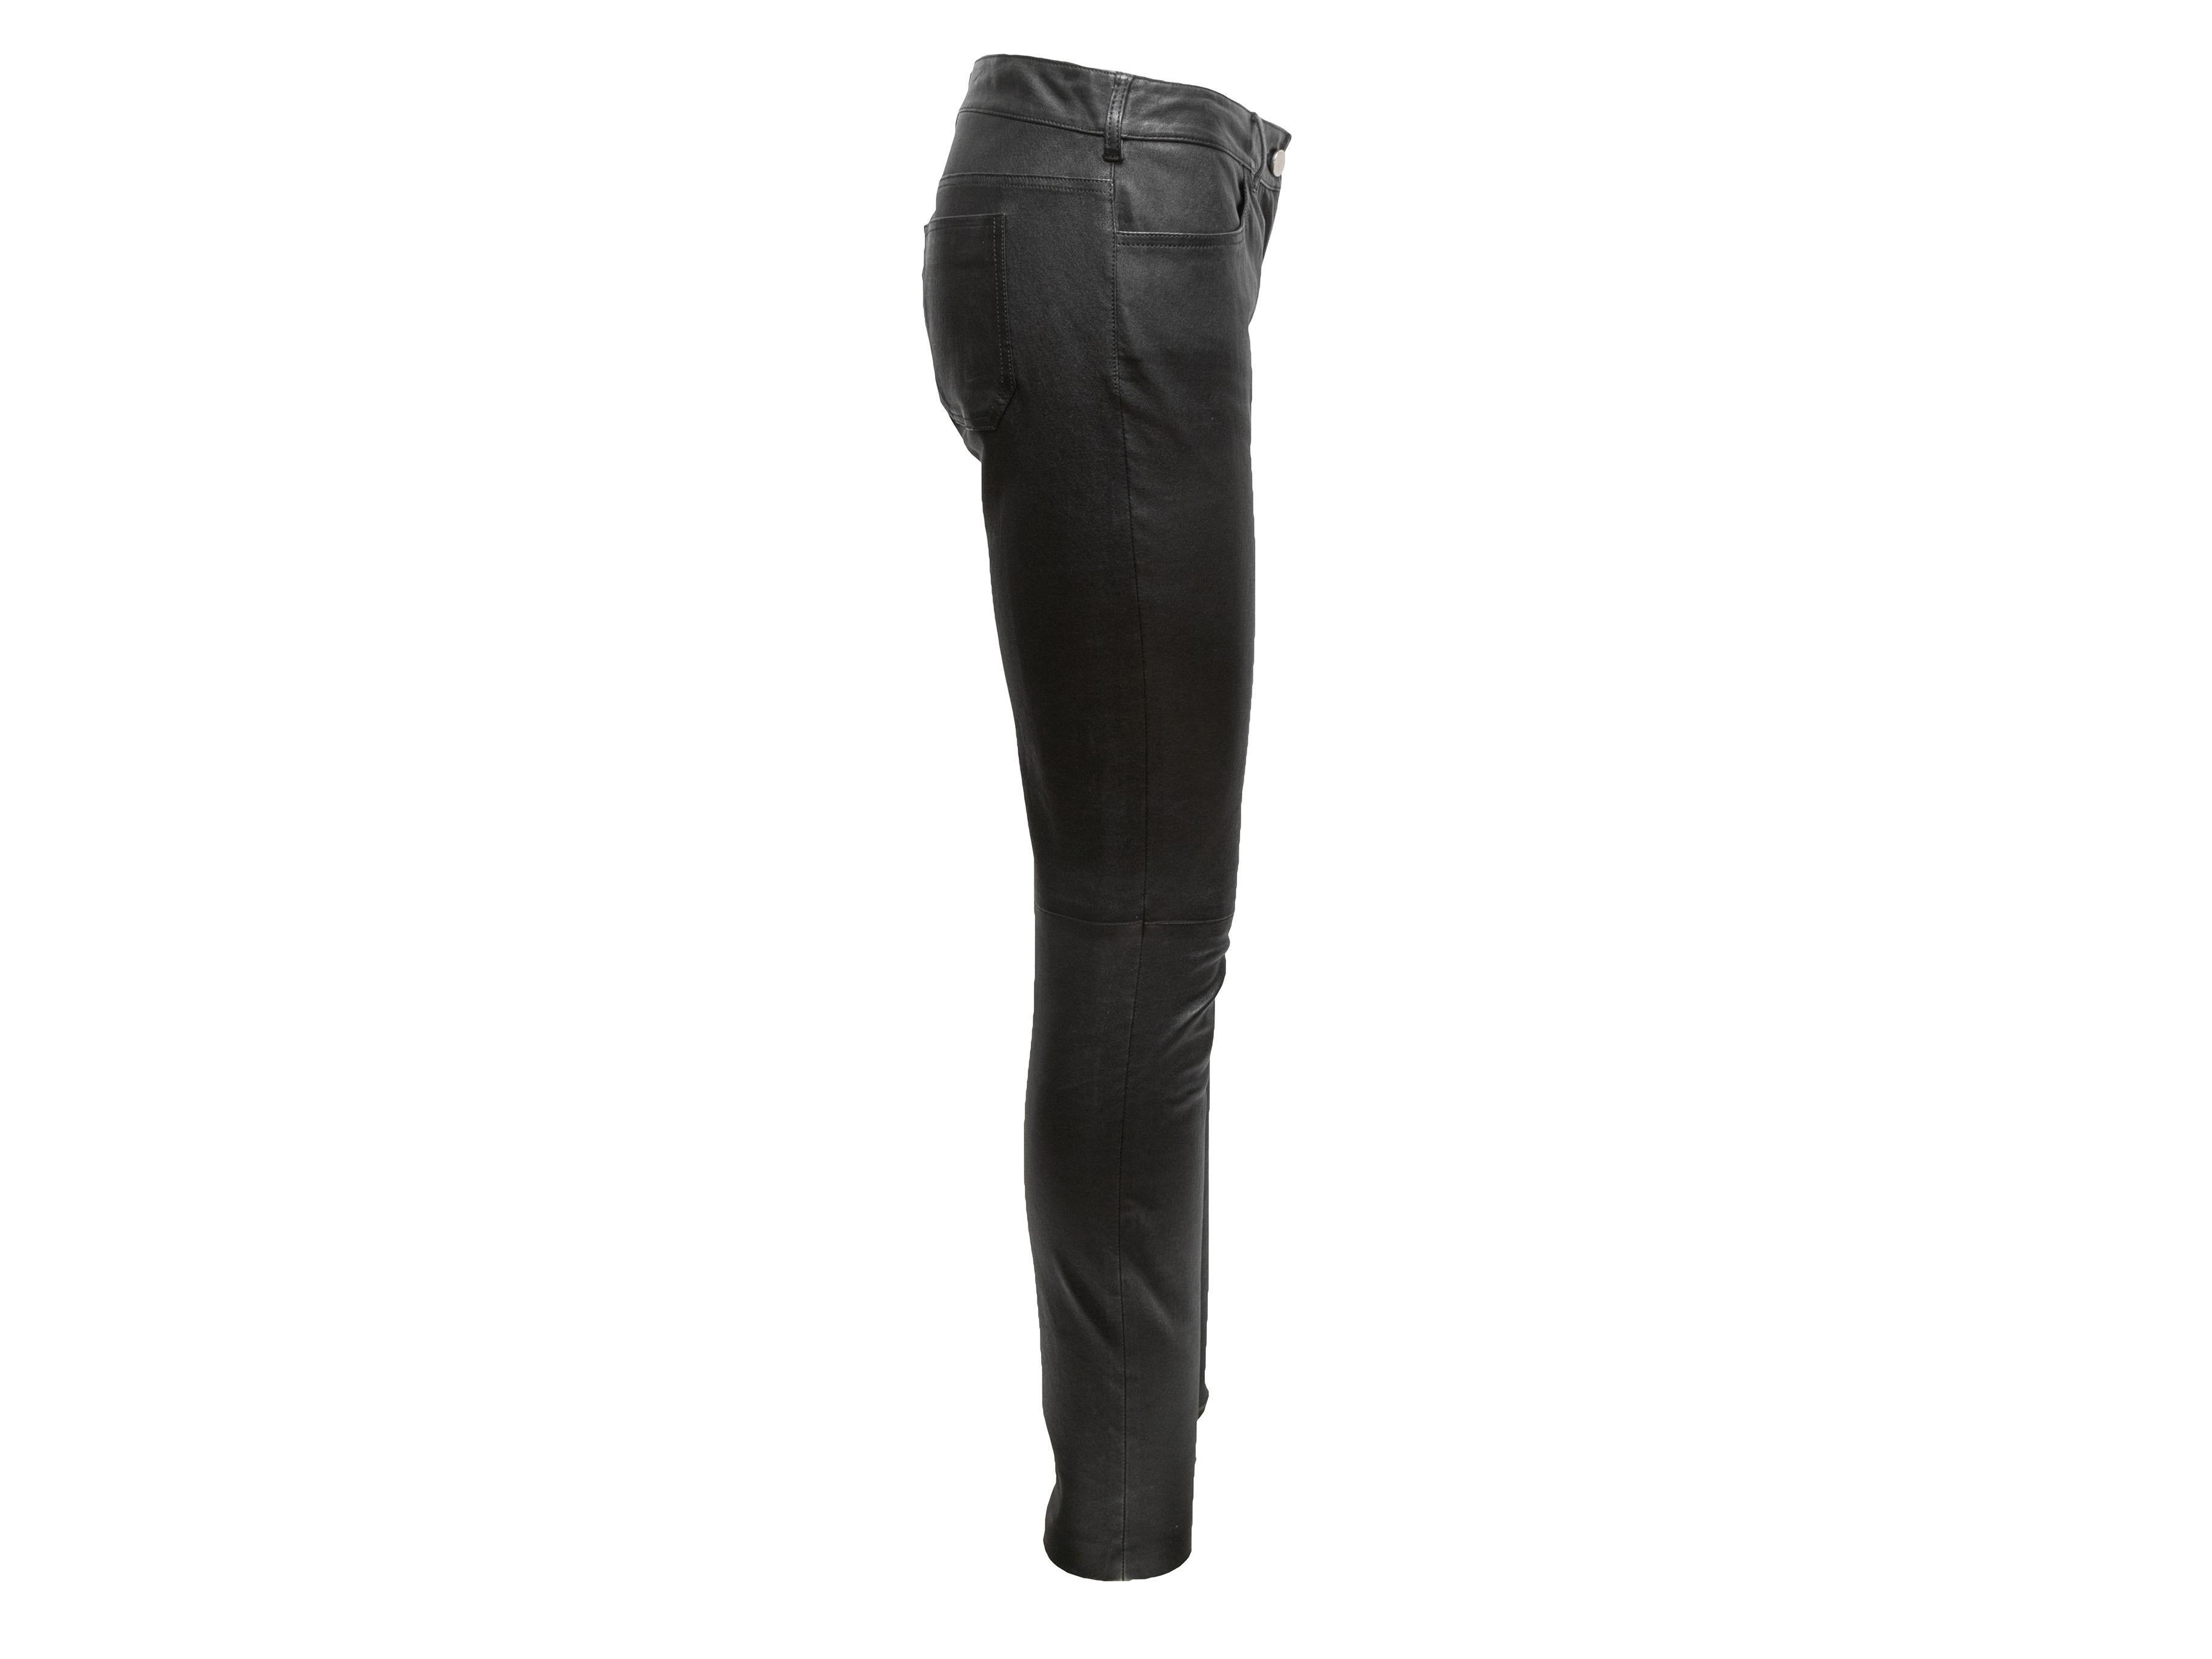 Black leather skinny-leg pants by Balenciaga. Four pockets. Zip and button closures at front. 32